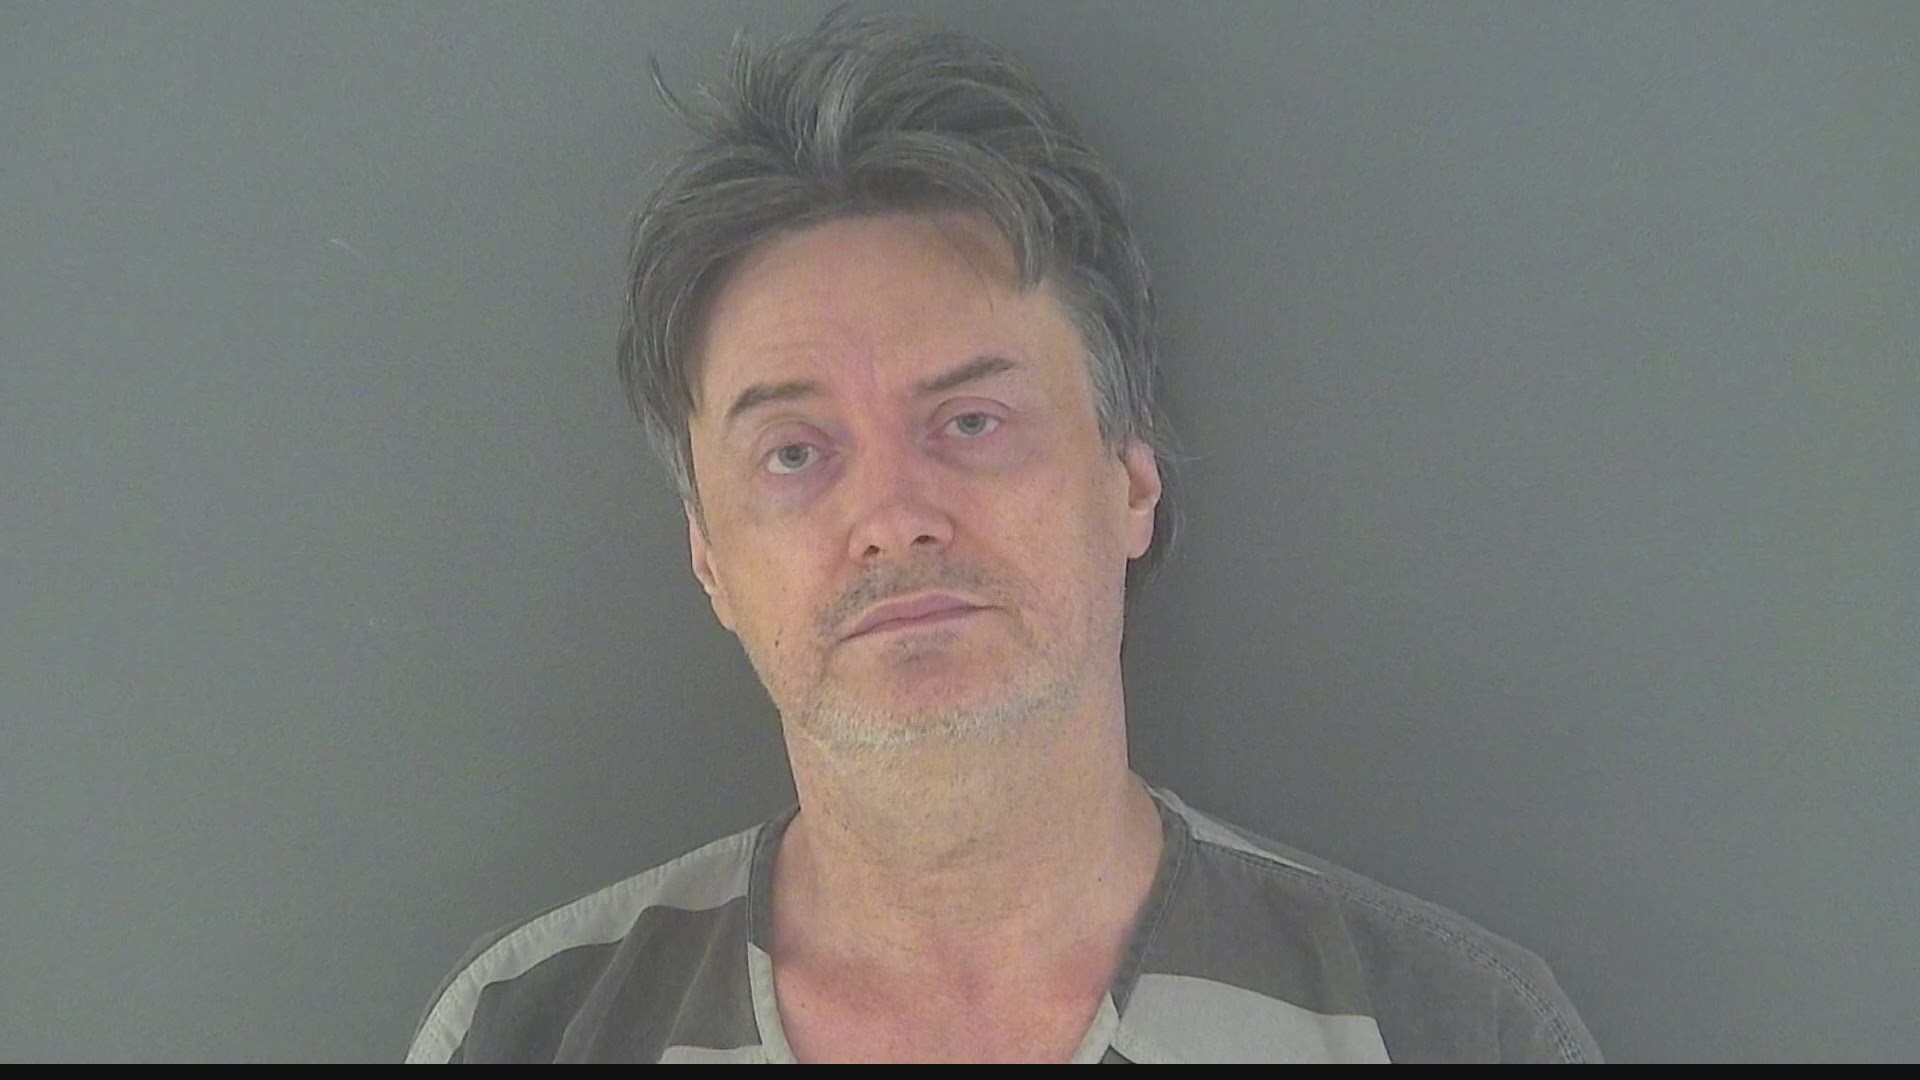 After more than 30 years, police have arrested the man connected to a string of violent home invasions and sexual assaults in Shelby County.